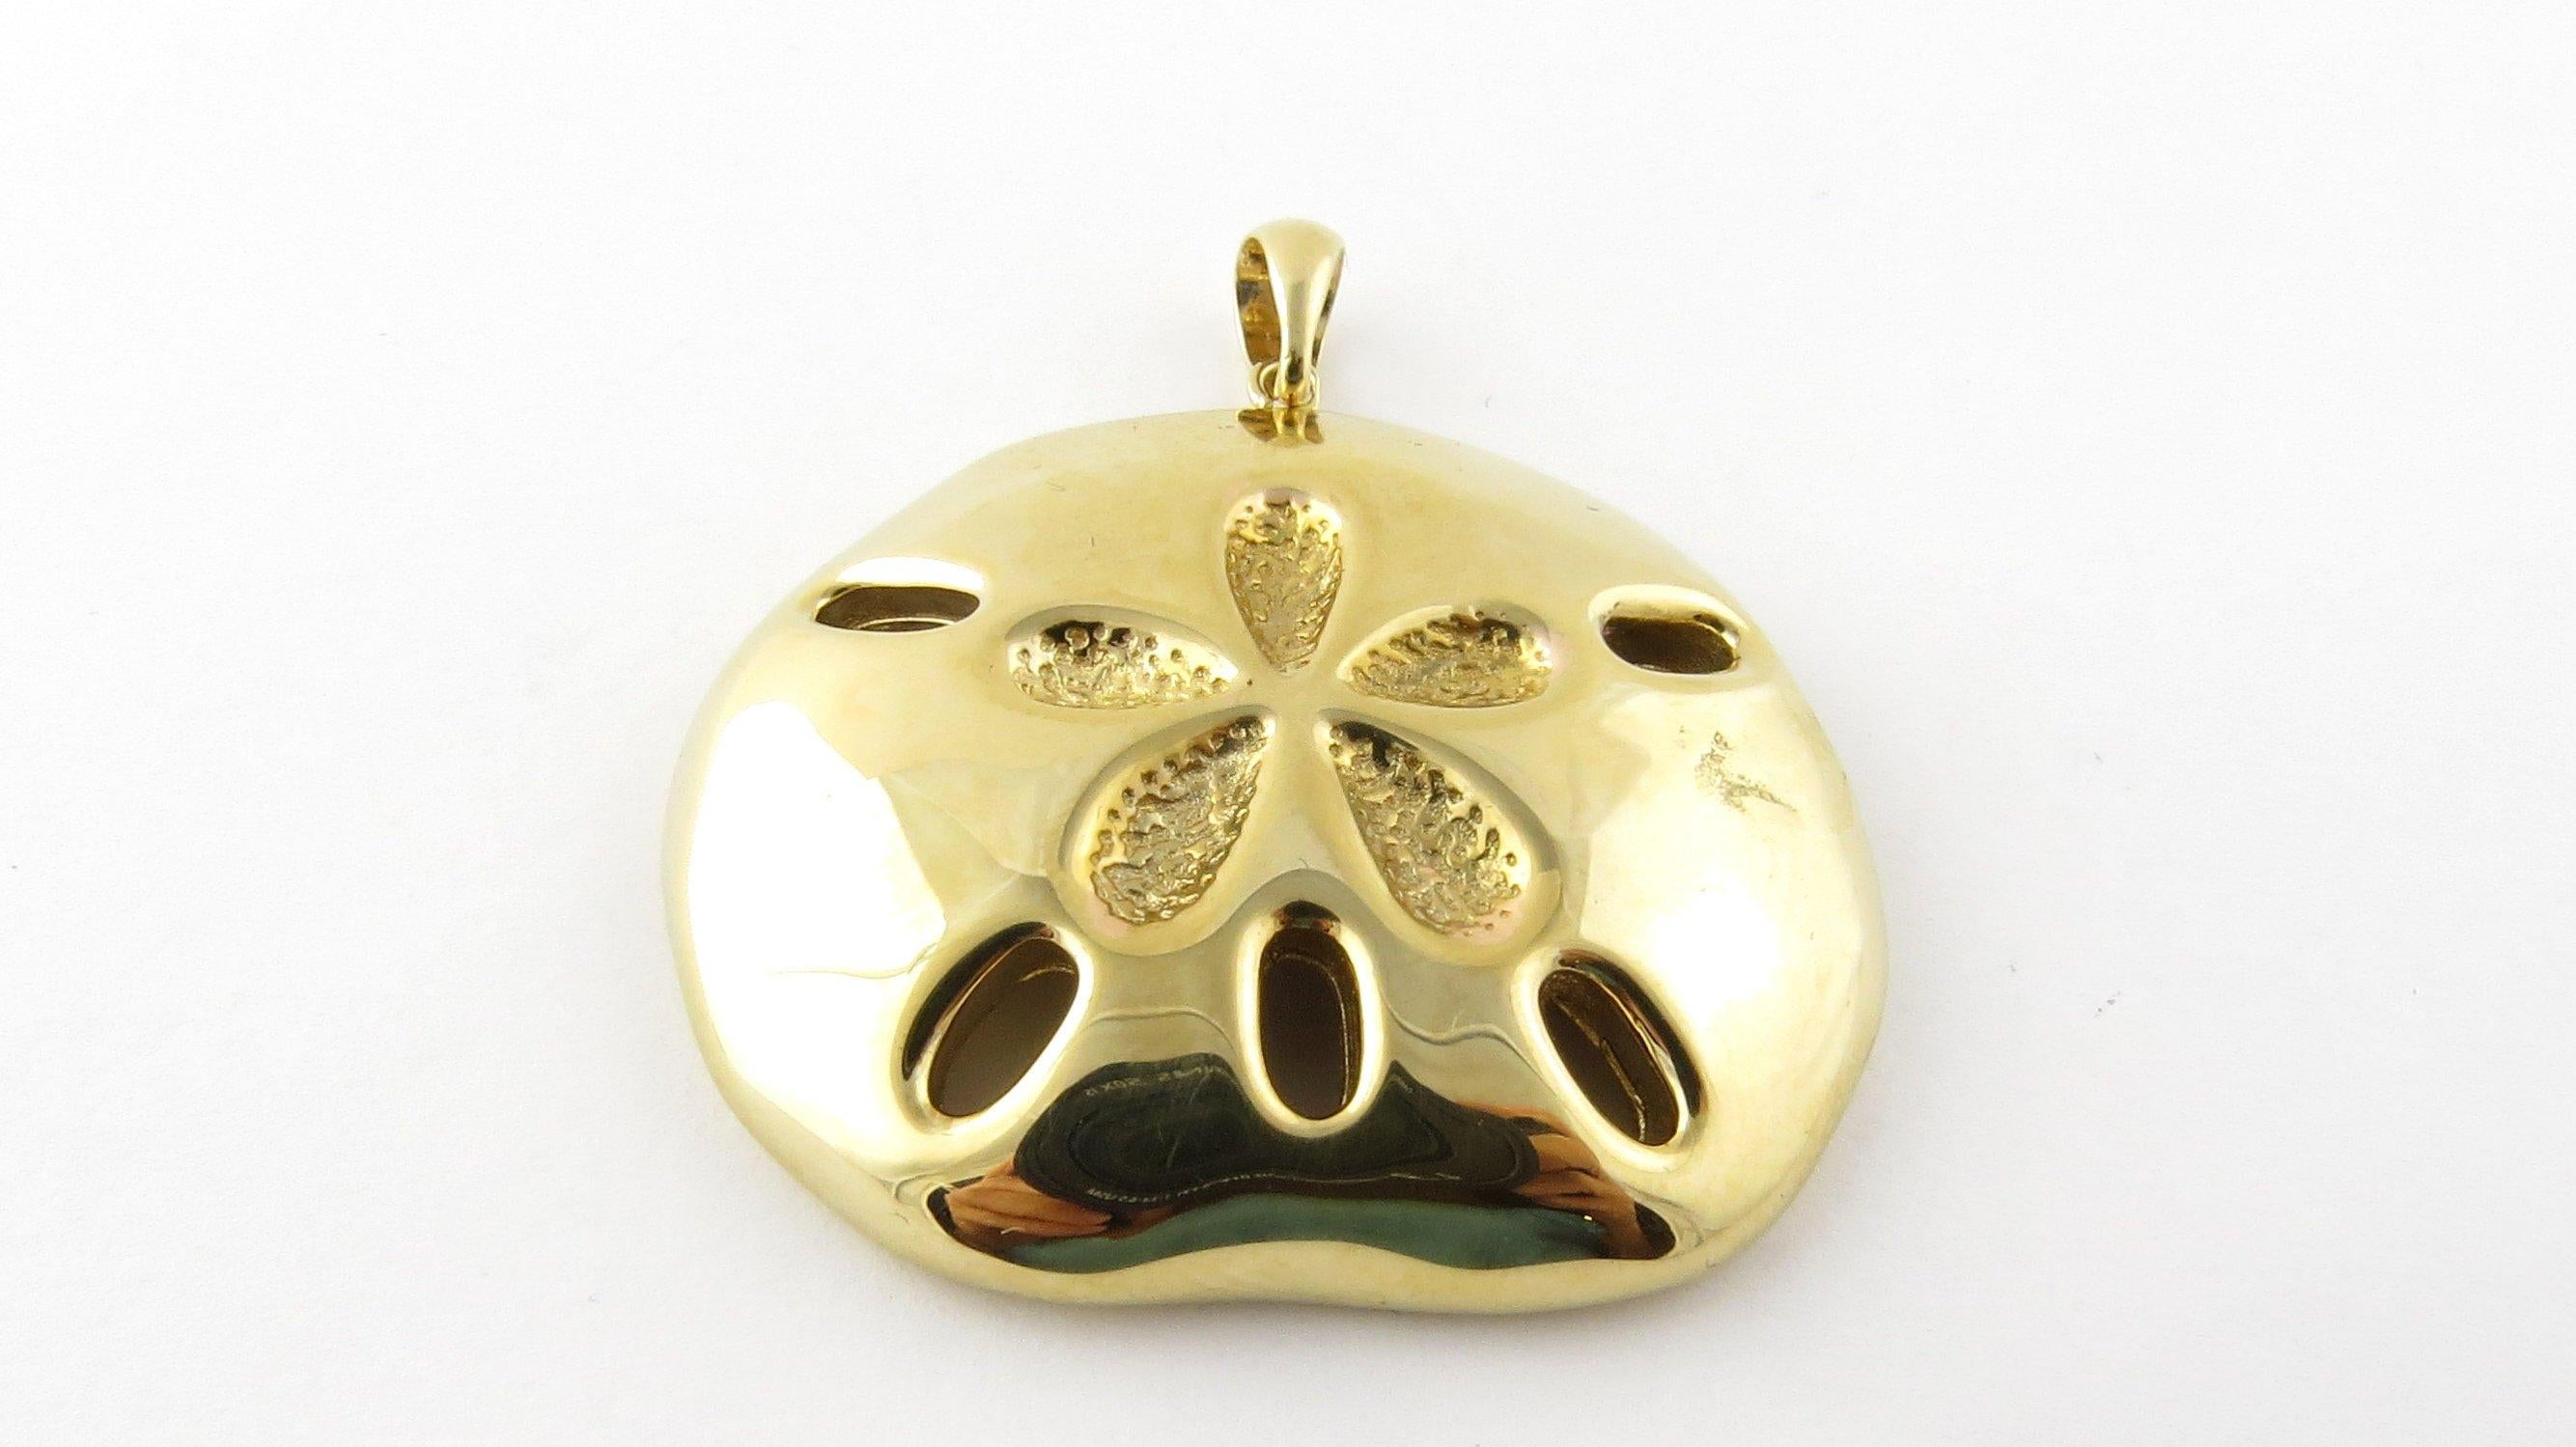 Vintage 14 Karat Yellow Gold Sand Dollar Pendant - One of nature's treasures! This lovely 3D charm features a beautiful sand dollar meticulously detailed 14K yellow gold.
Size: 32 mm x 36 mm (actual pendant). Weight: 2.7 dwt. / 4.3 gr. Stamped: